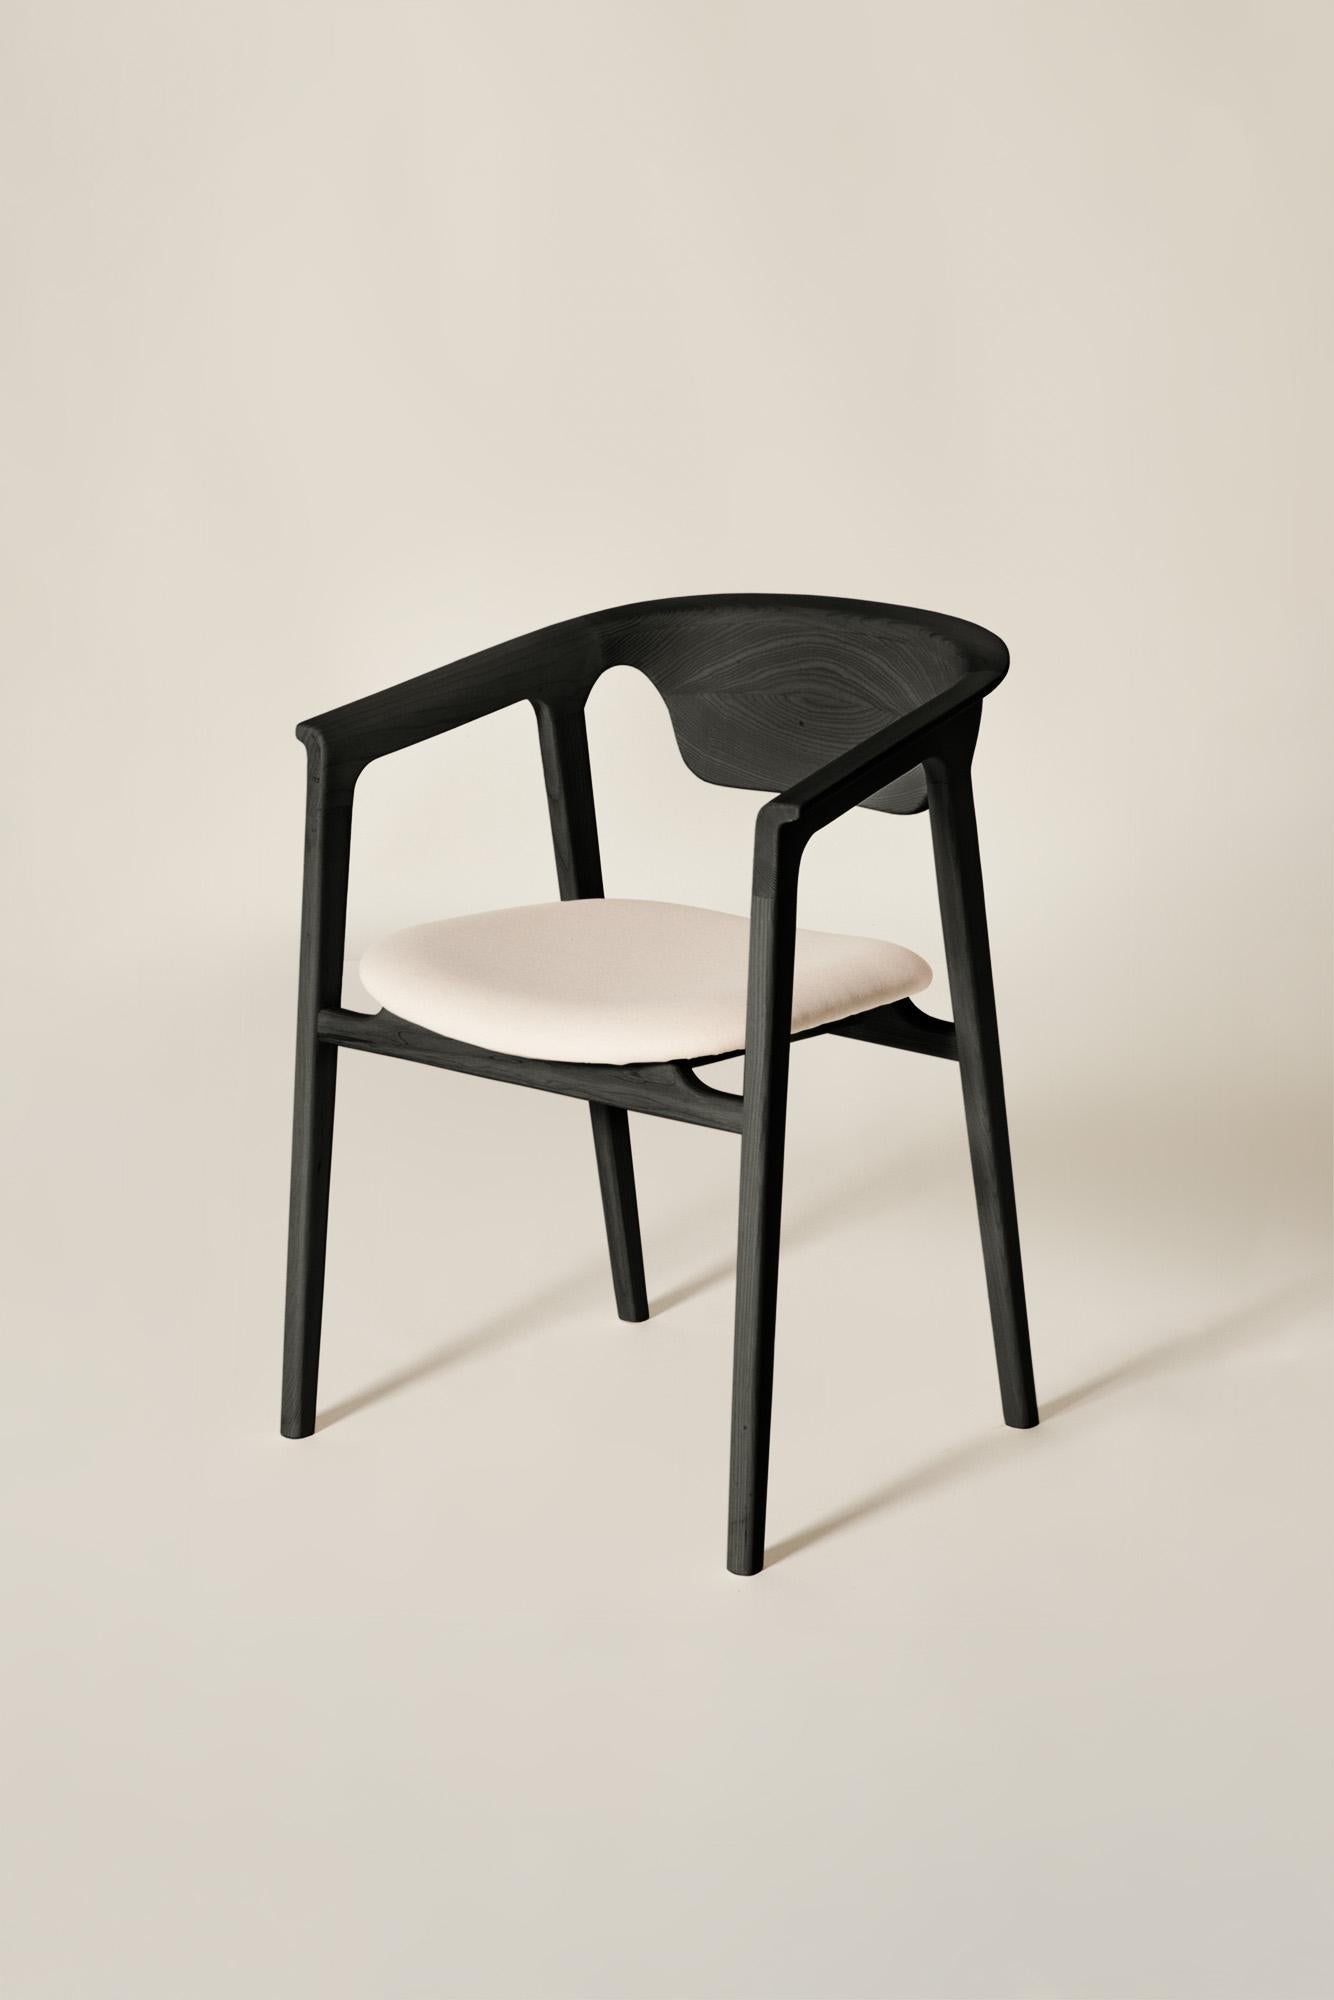 Duna Solid Wood Chair, Ash in Handmade Black Finish, Contemporary For Sale 5